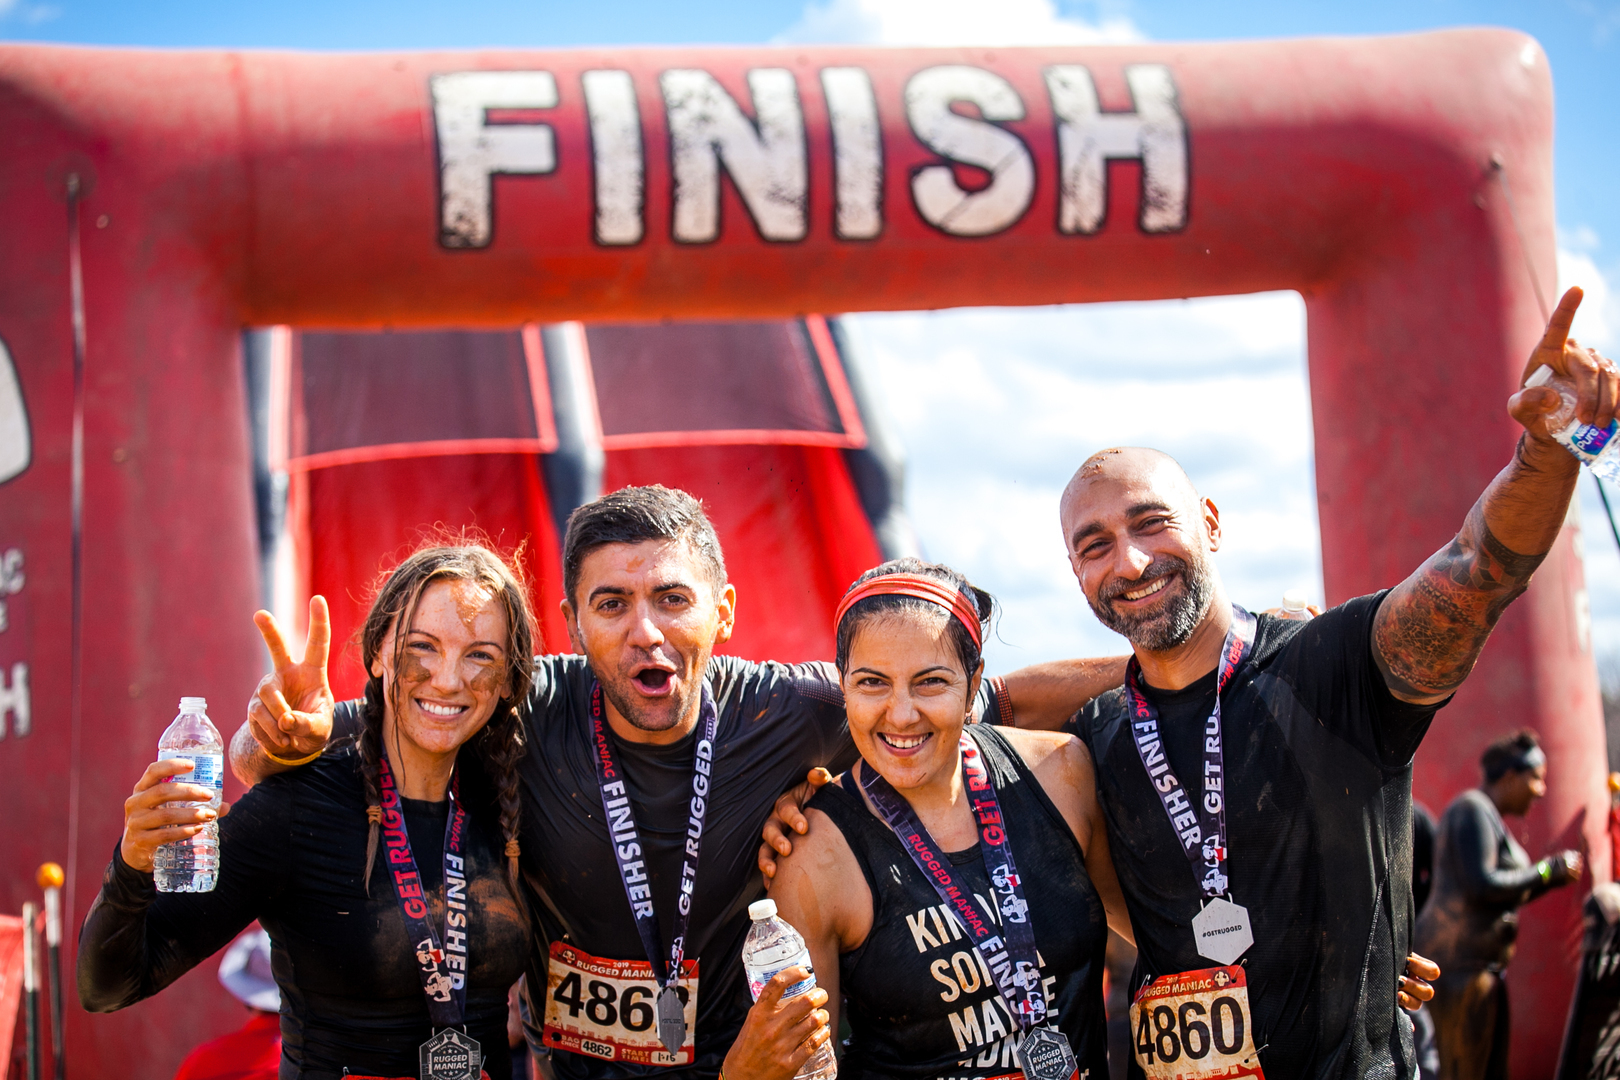 Rugged Maniac 5K Obstacle Course - Columbus, Delaware, Ohio, United States